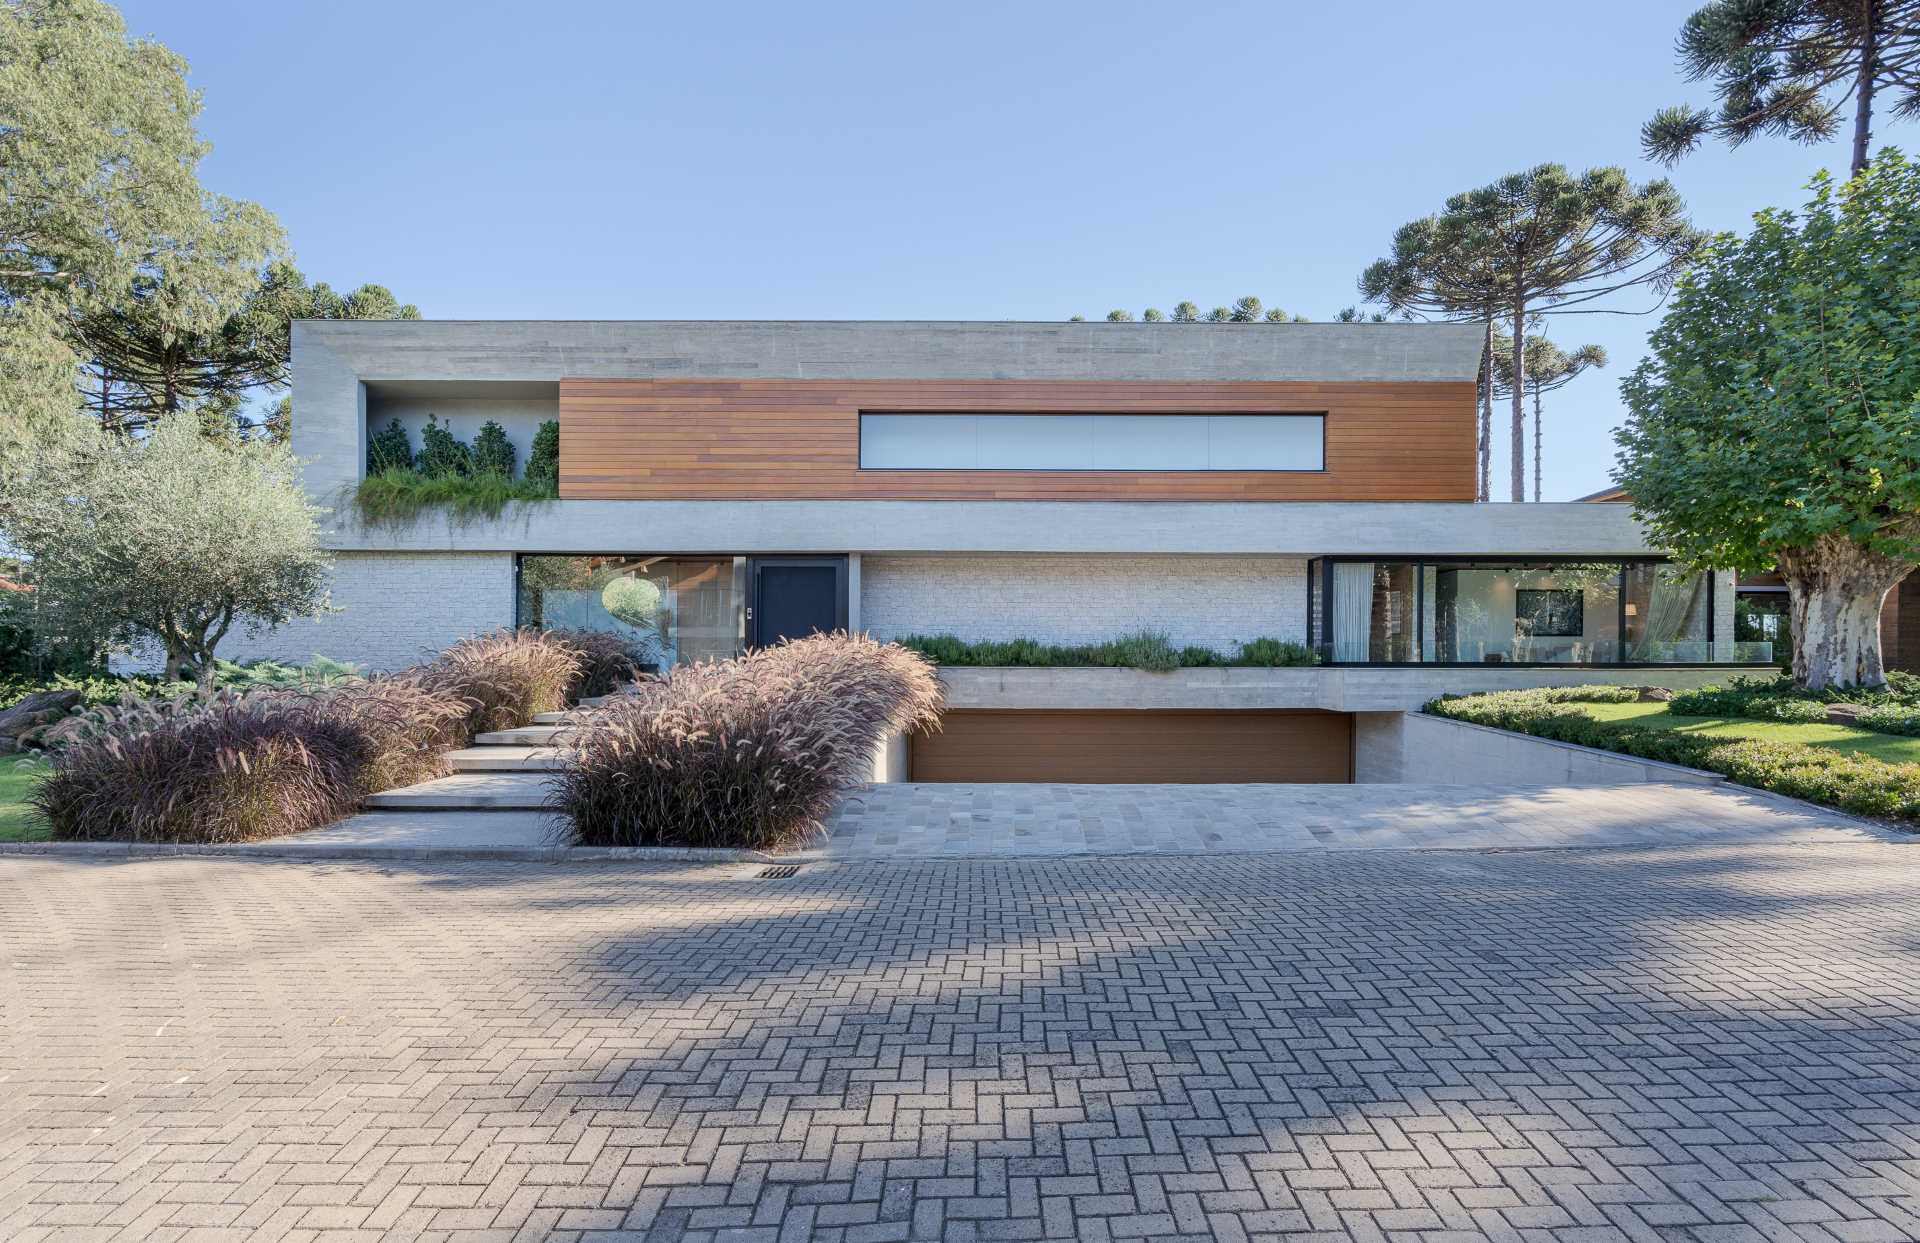 The facade of the home showcases concrete, wood, and stone, as well as a sunken garage and a stepped pathway lined with plants.